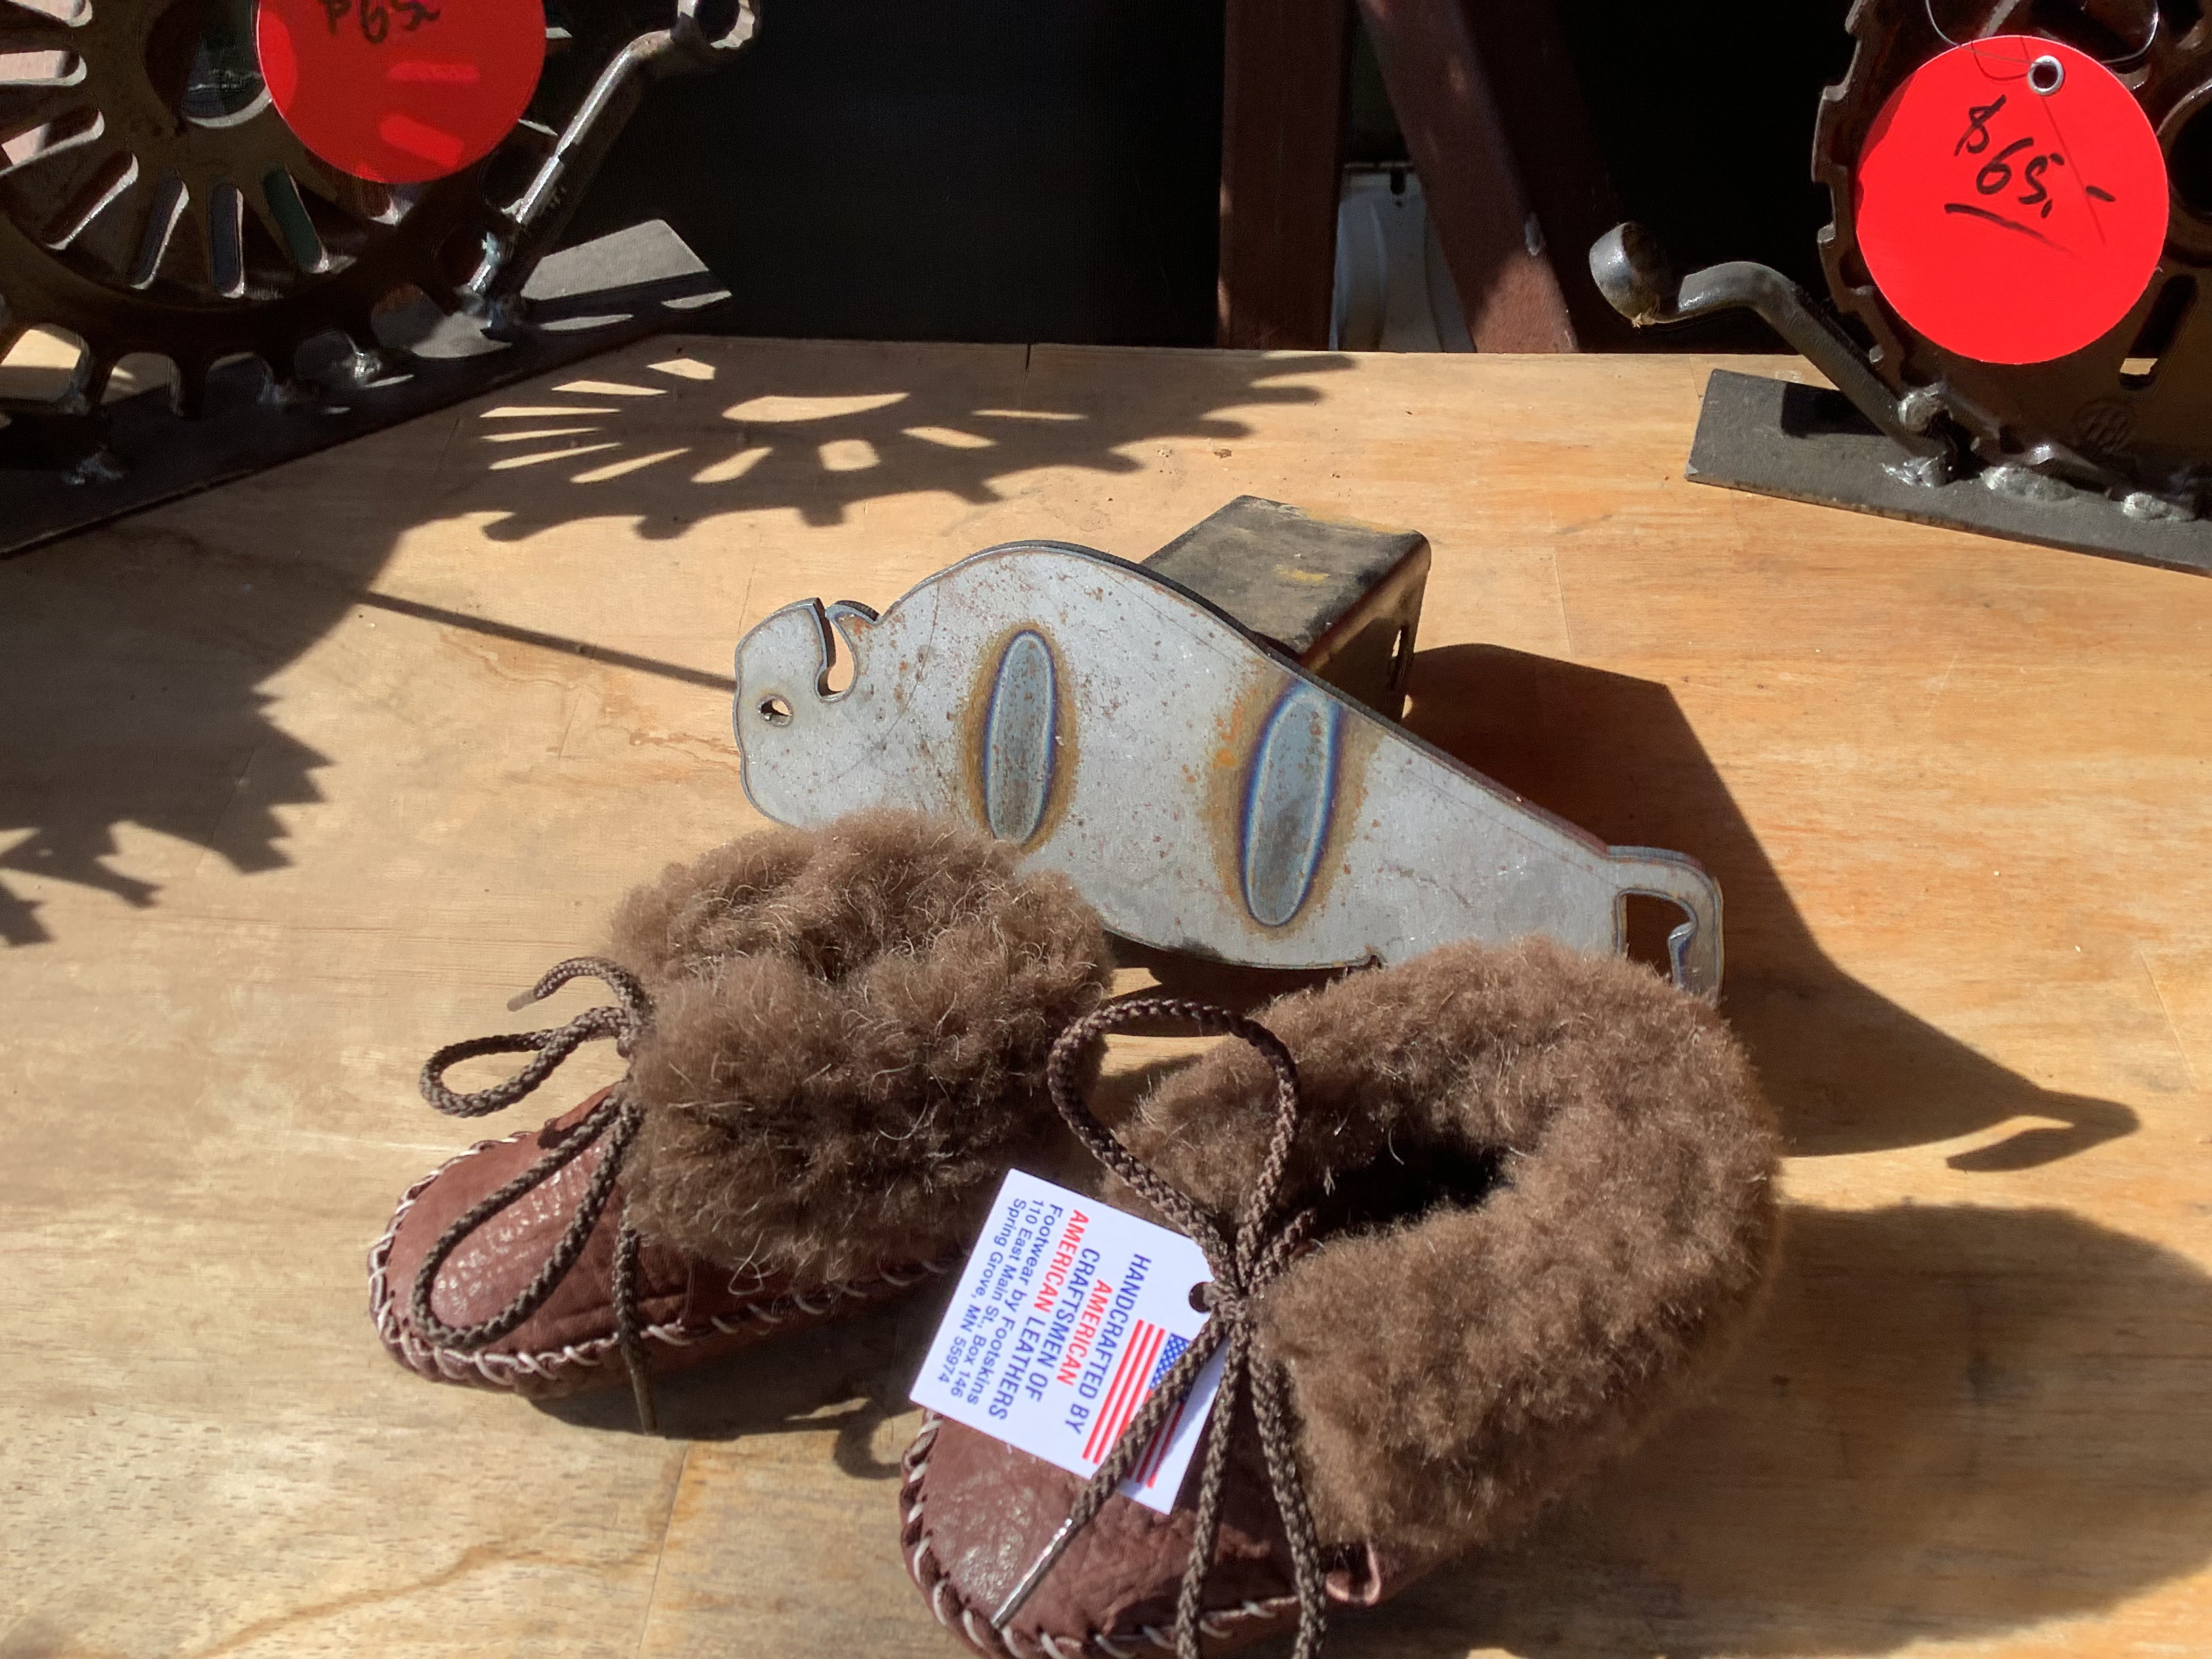 Footskins - Infant and Toddler Bison leather Booties  - $35 -$55